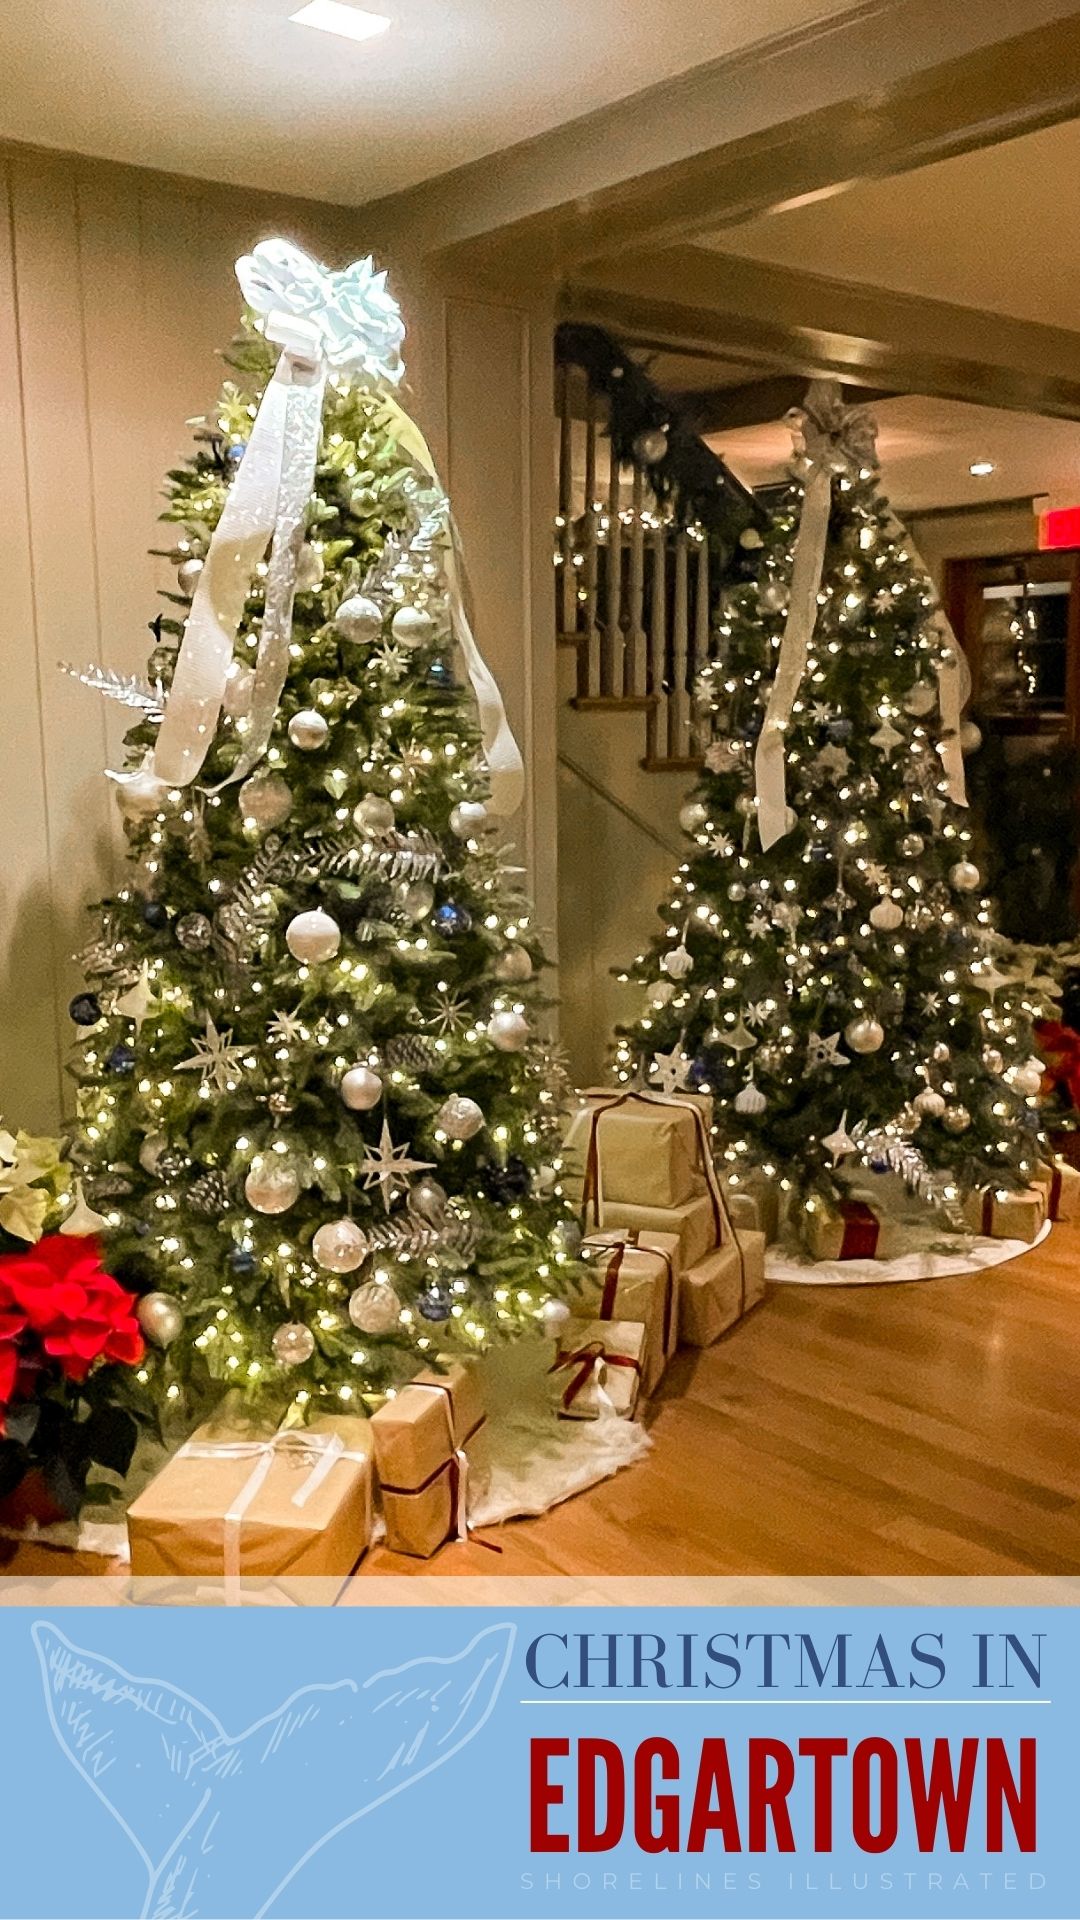 Celebrating Christmas in Edgartown on Marthas Vineyard at the Harbor View Hotel